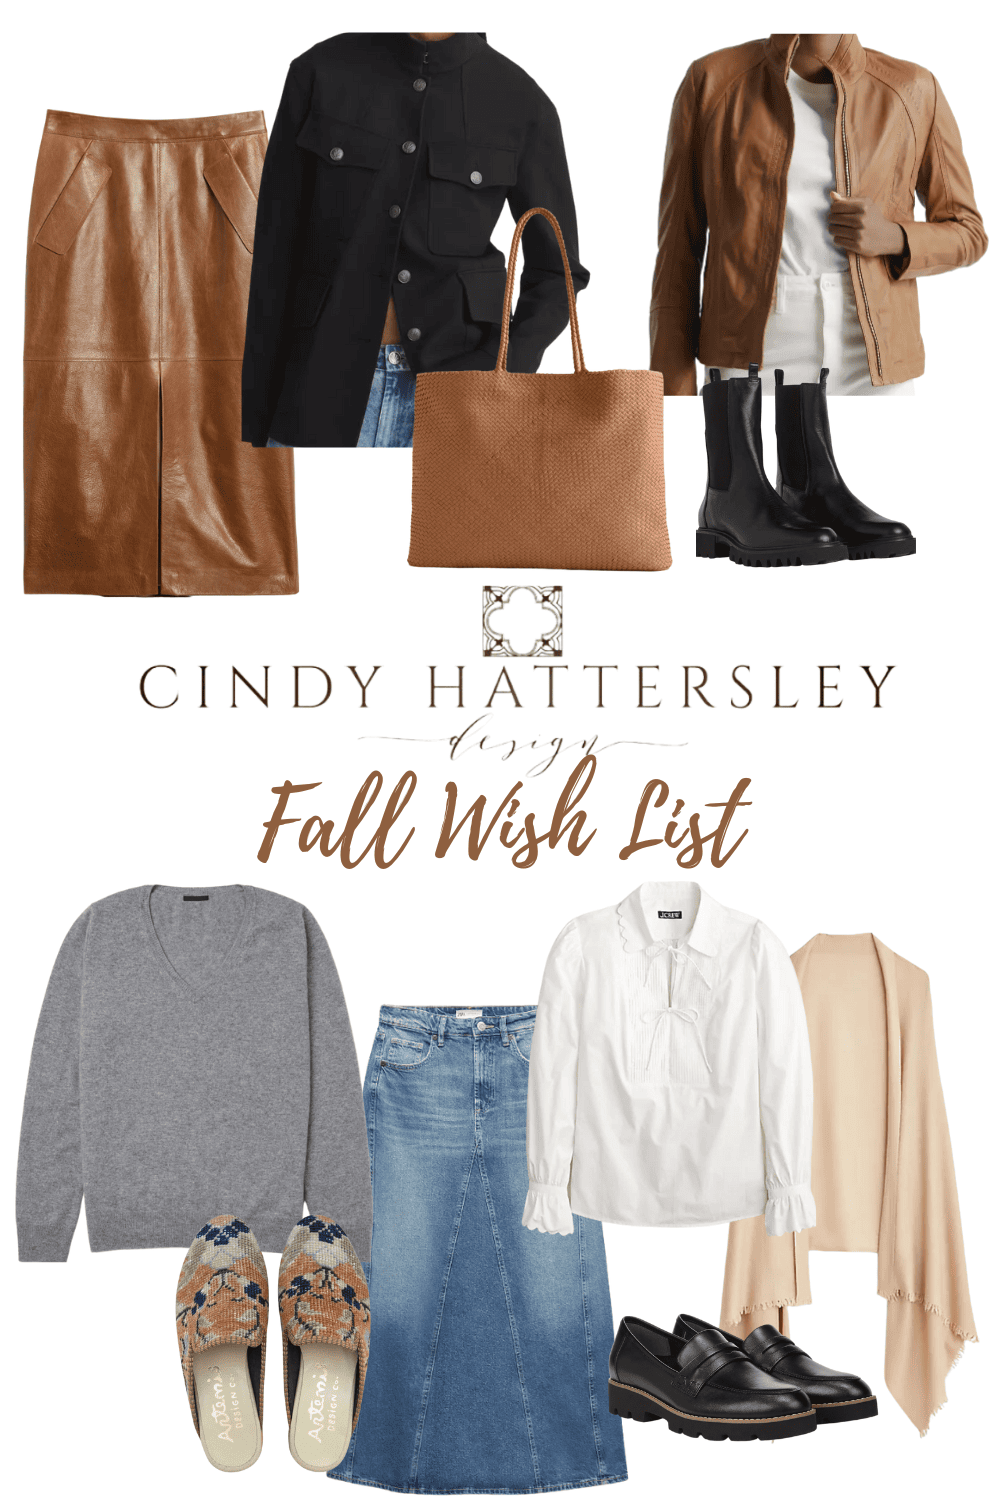 20 Popular Fall Outfits Ideas For Over 50 In 2019 Style LOok  Chic winter  outfits, Popular fall outfits, Fall trends outfits